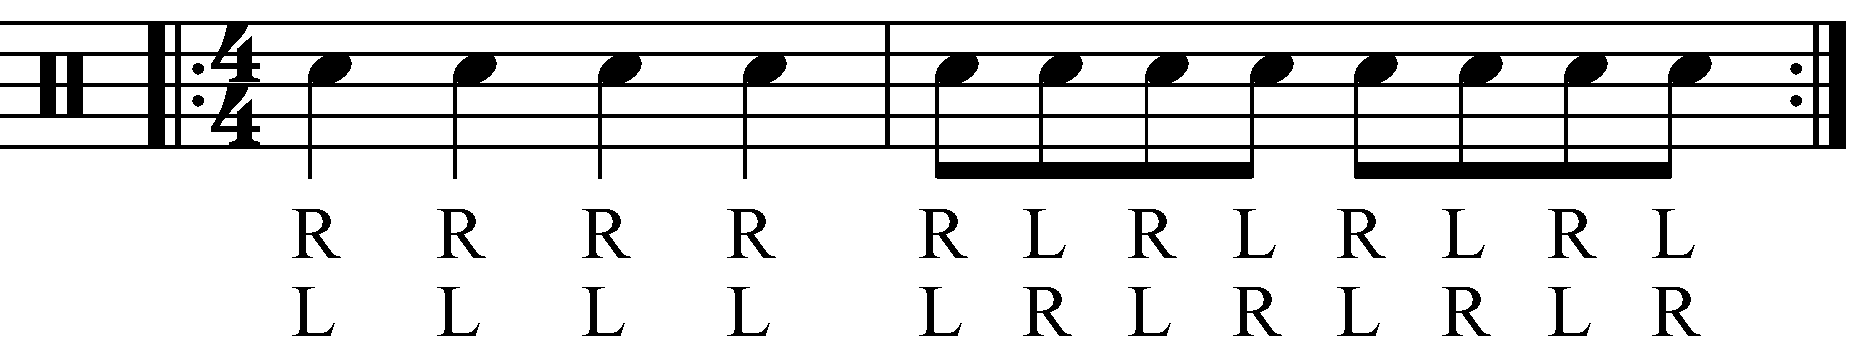 The quarter note version of the exercise